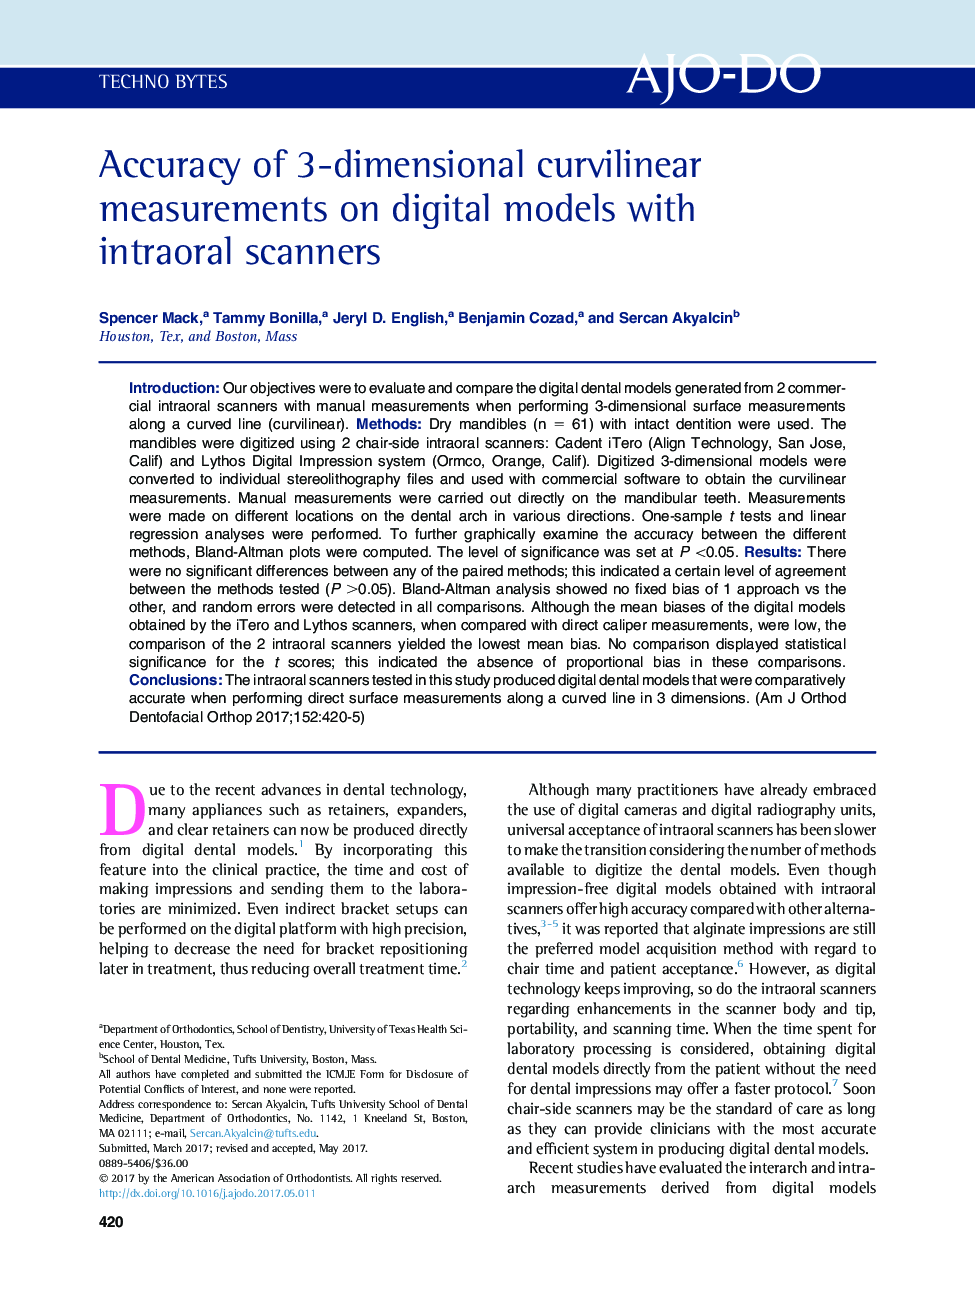 Accuracy of 3-dimensional curvilinear measurements on digital models with intraoral scanners